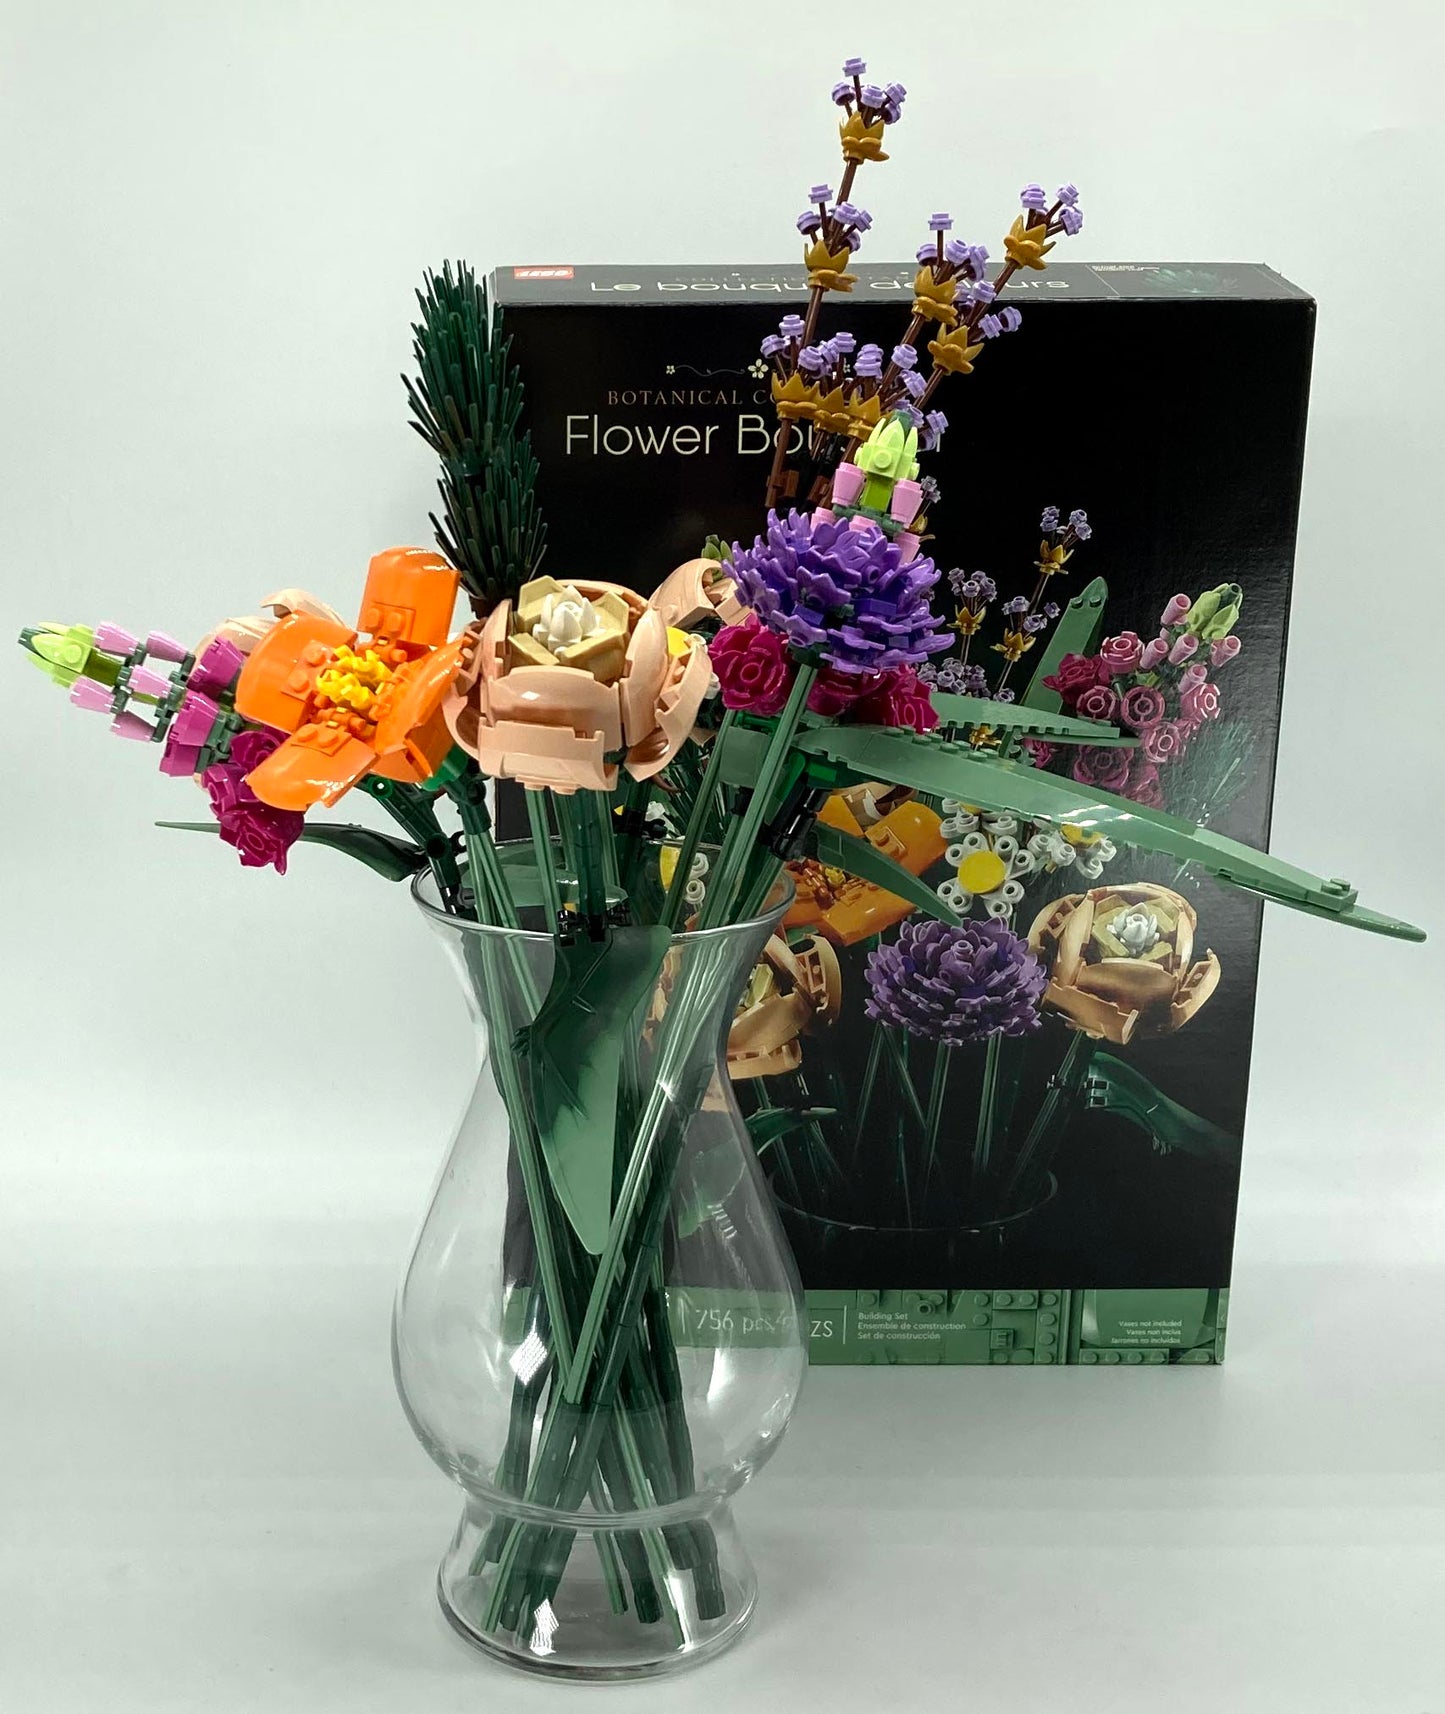 Used Set 10280 Flower Bouquet (with Instruction Manual and Vase)